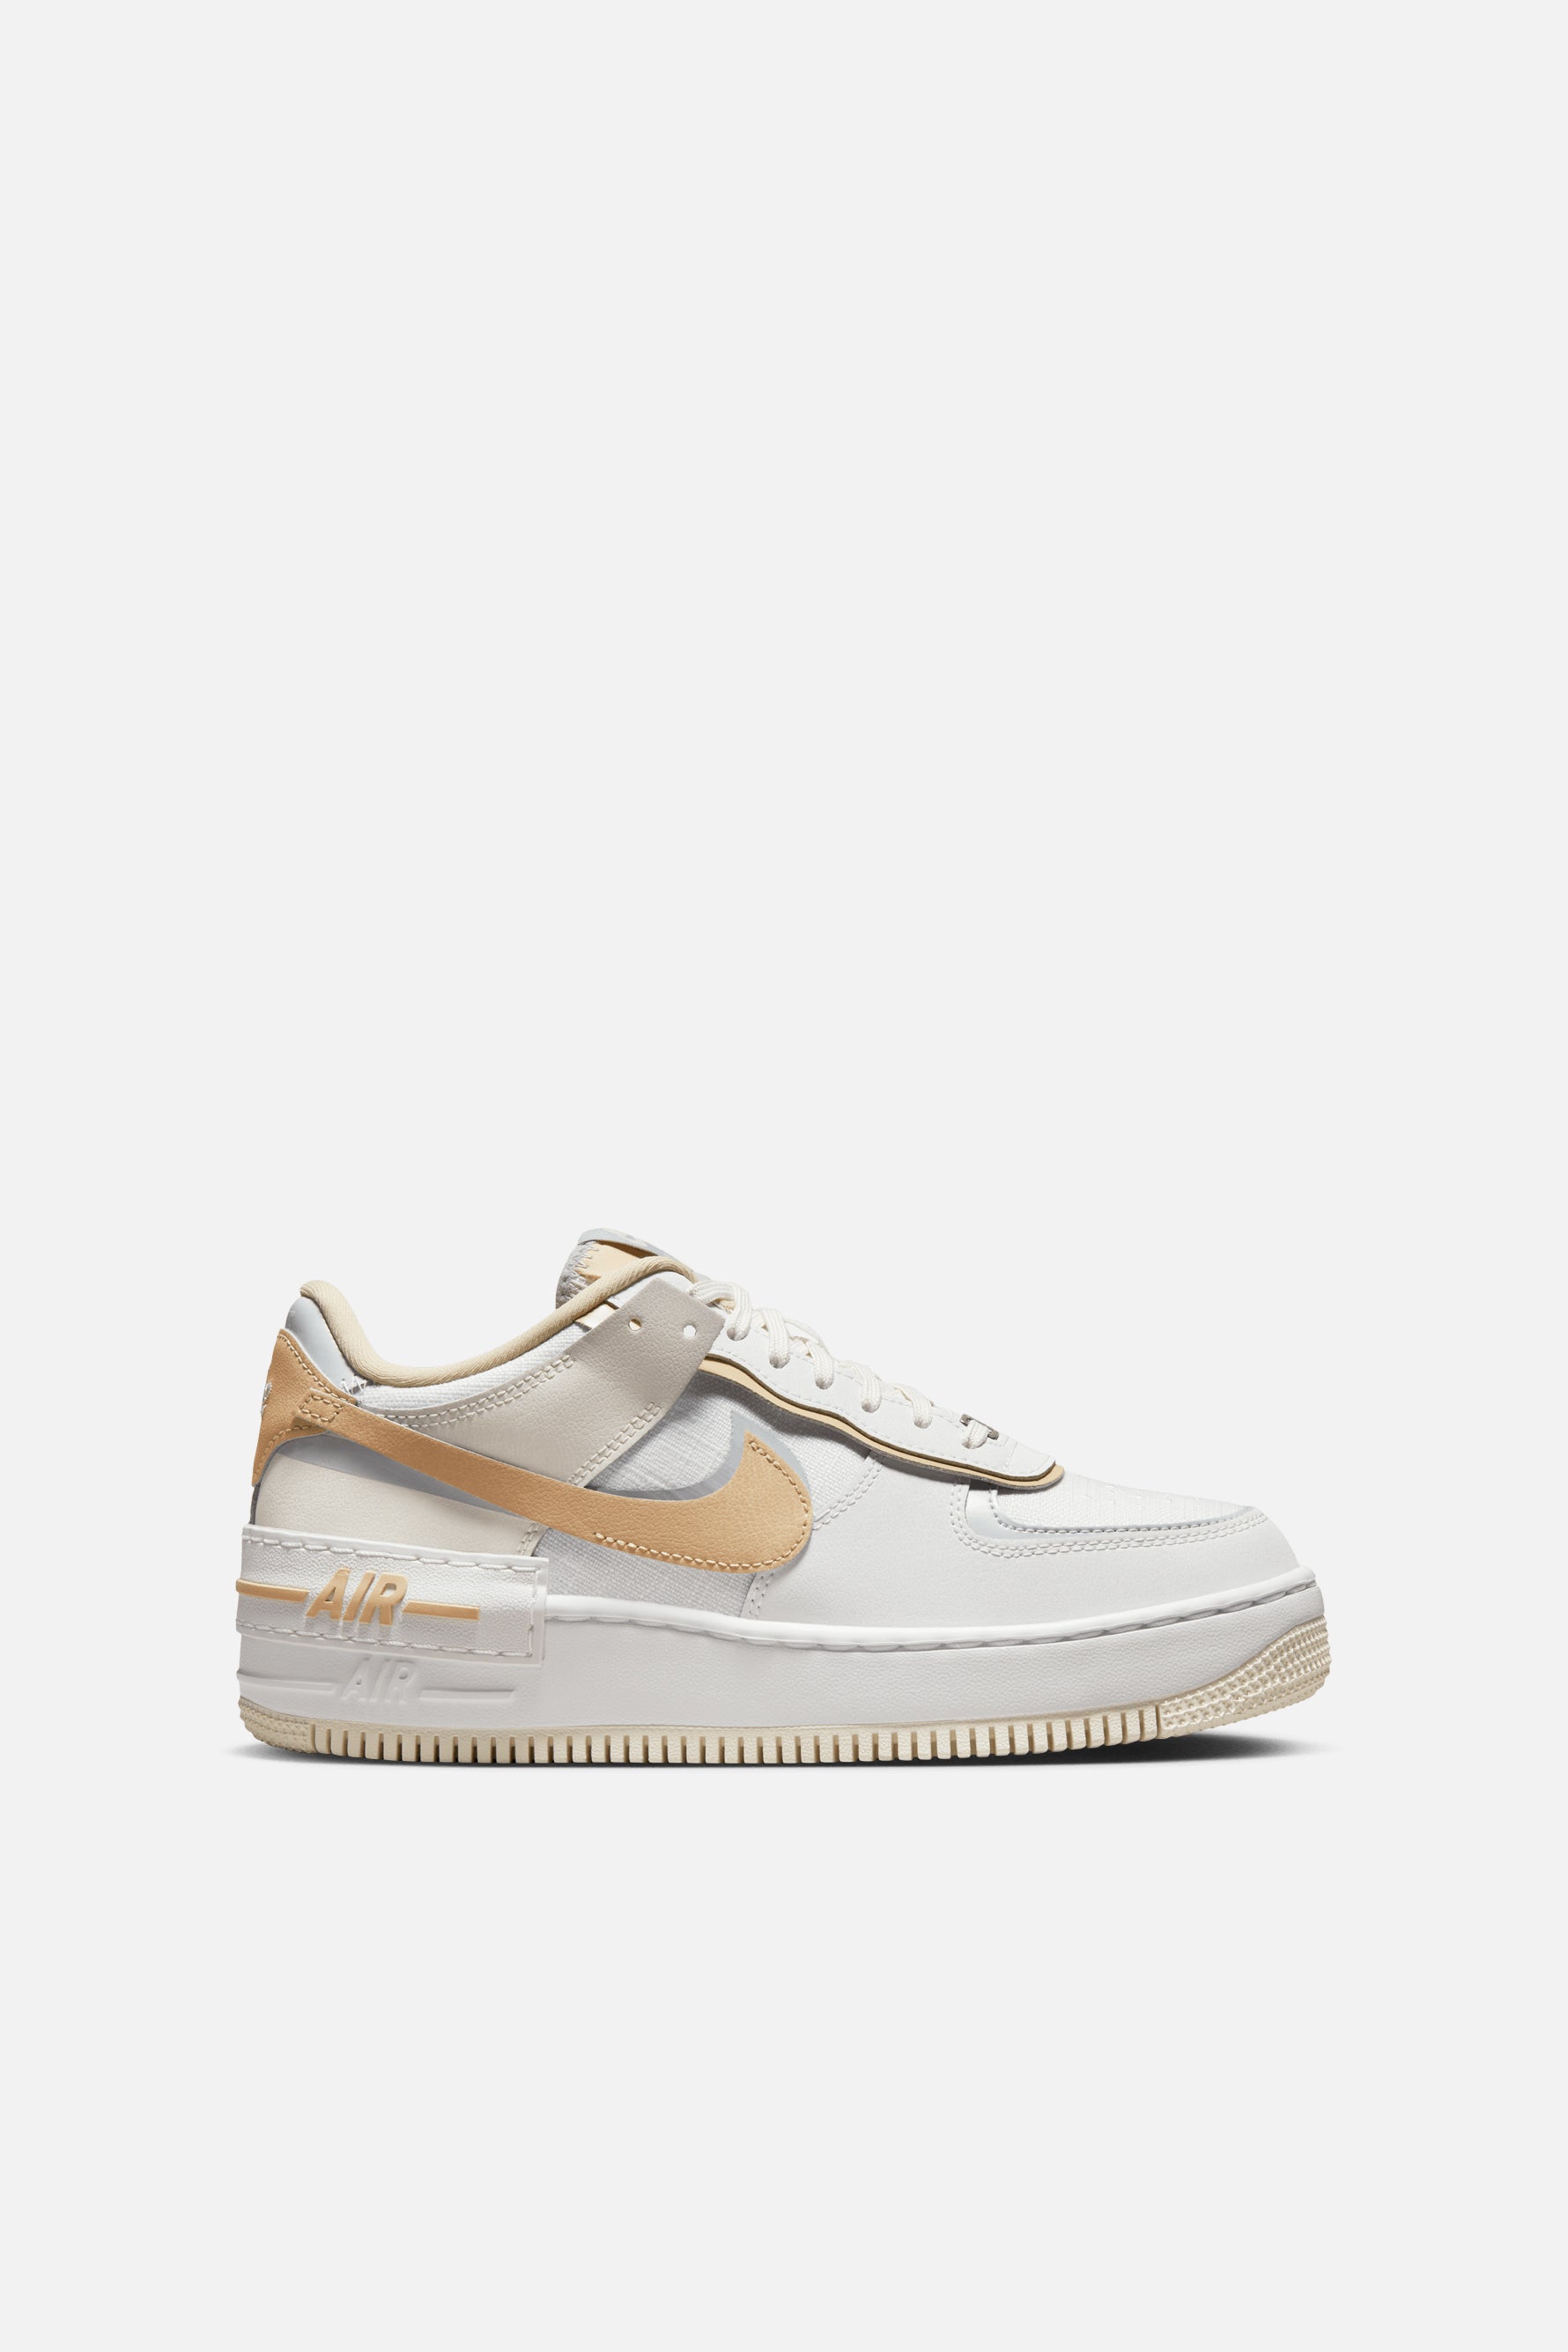 Size+10+-+Nike+Air+Force+1+Low+OFF-WHITE+University+Gold+Metallic+Silver  for sale online